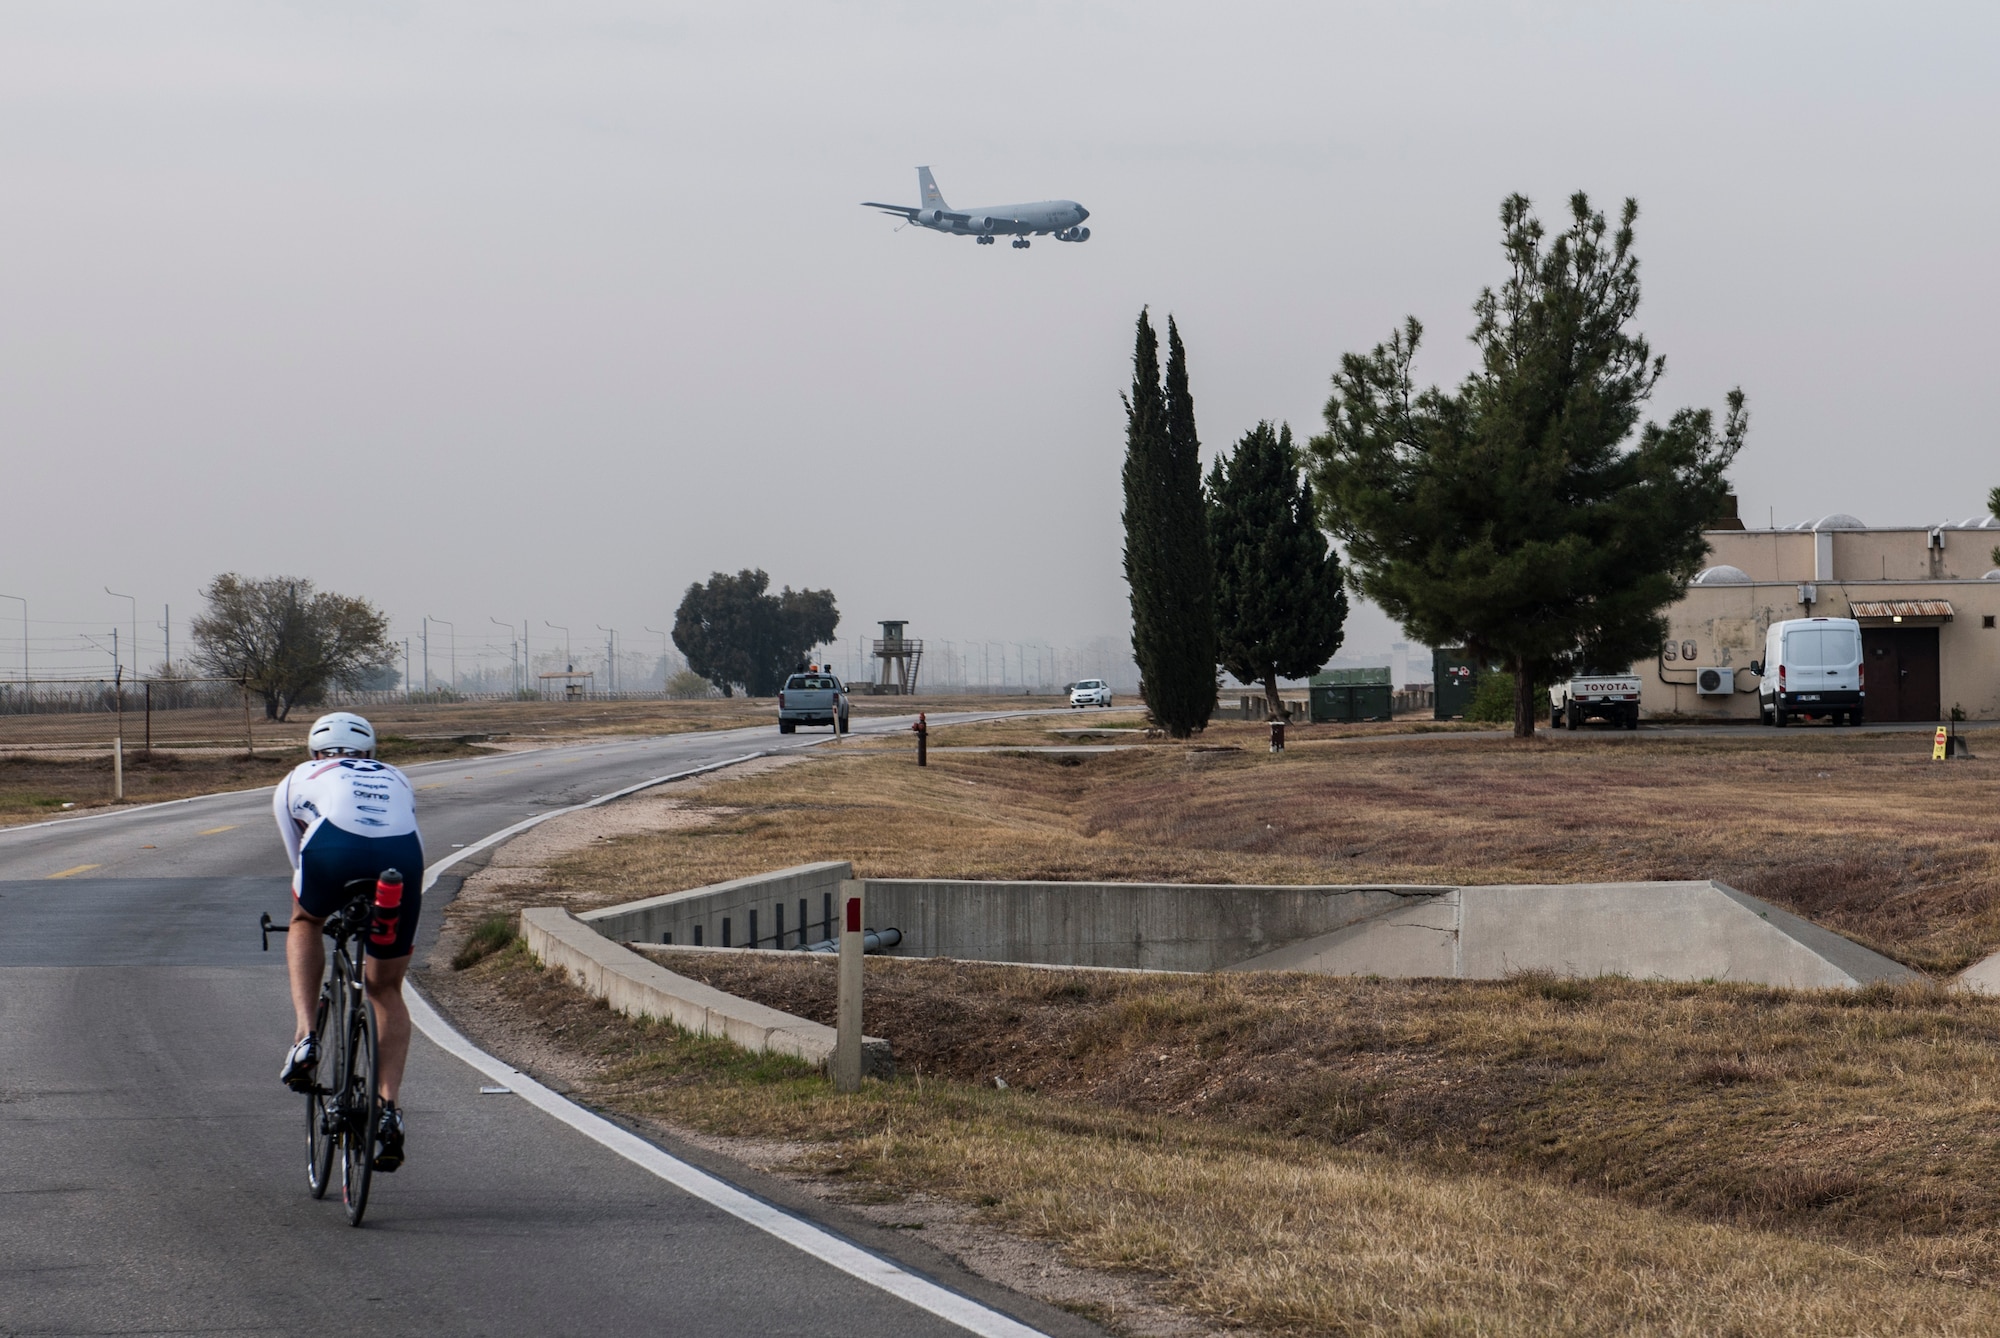 U.S. Air Force Senior Master Sgt. Jason Chiasson, 39th Communications Squadron production superintendent, rides past the flightline Dec. 10, 2015, at Incirlik Air Base, Turkey. Chiasson, a member of the Air Force Cycling Team, regularly cycles a variety distances both indoors and outdoors to stay prepared for the races he will participate in as part of the cycling team. (U.S. Air Force photo by Senior Airman Krystal Ardrey/Released)